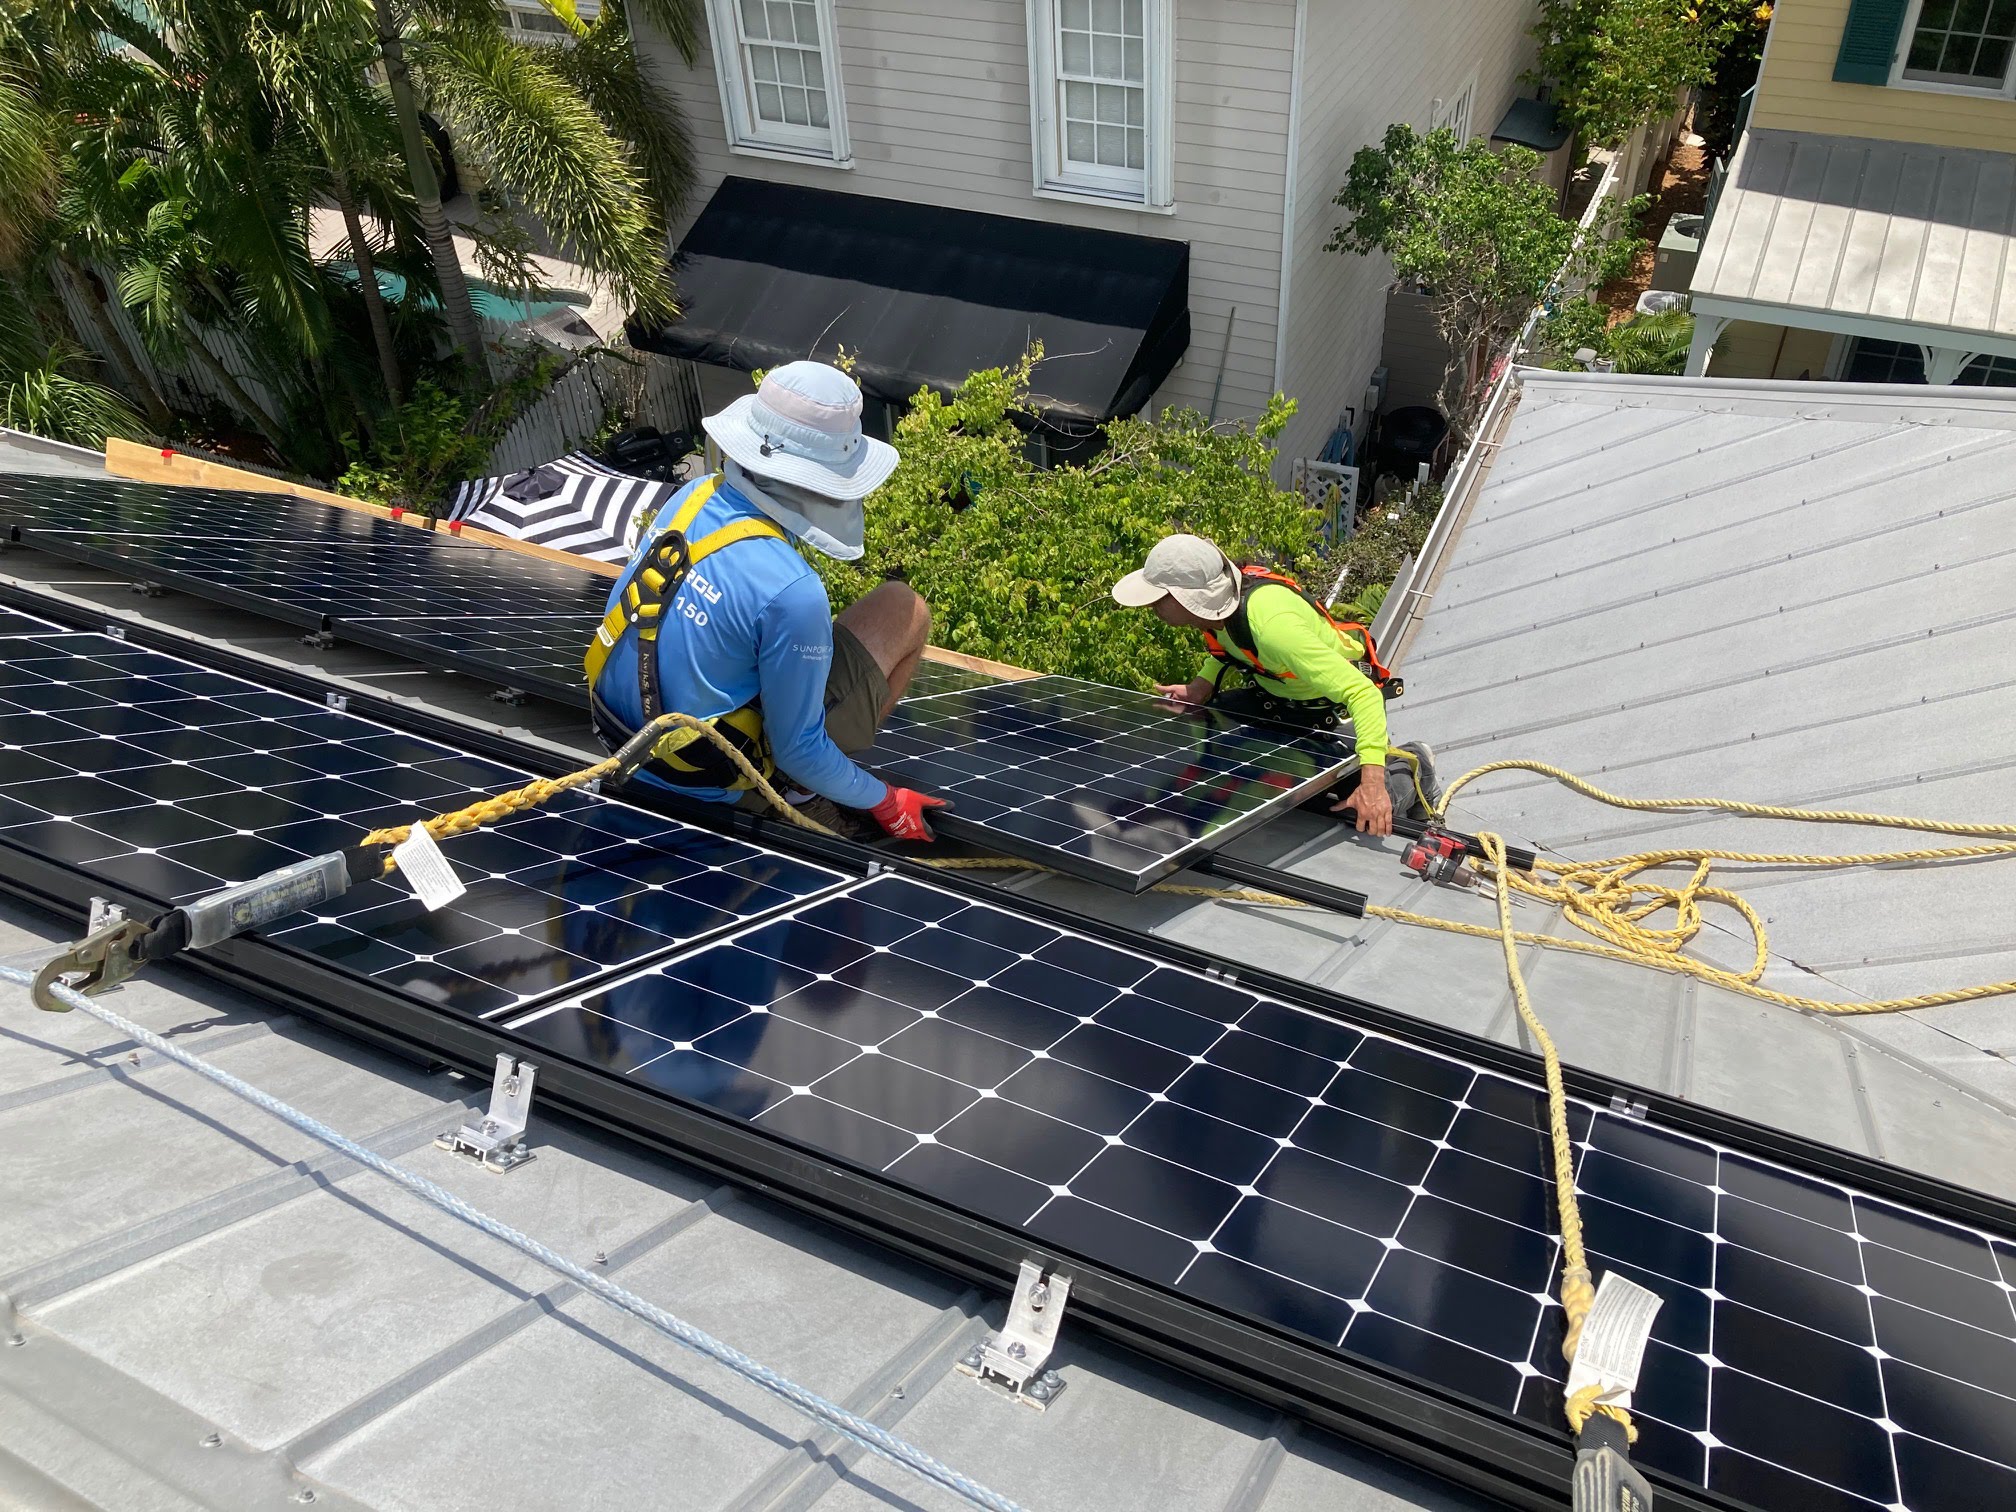 Design and Optimize the Solar PV Layout (Solar Zone) on Your Metal Roof